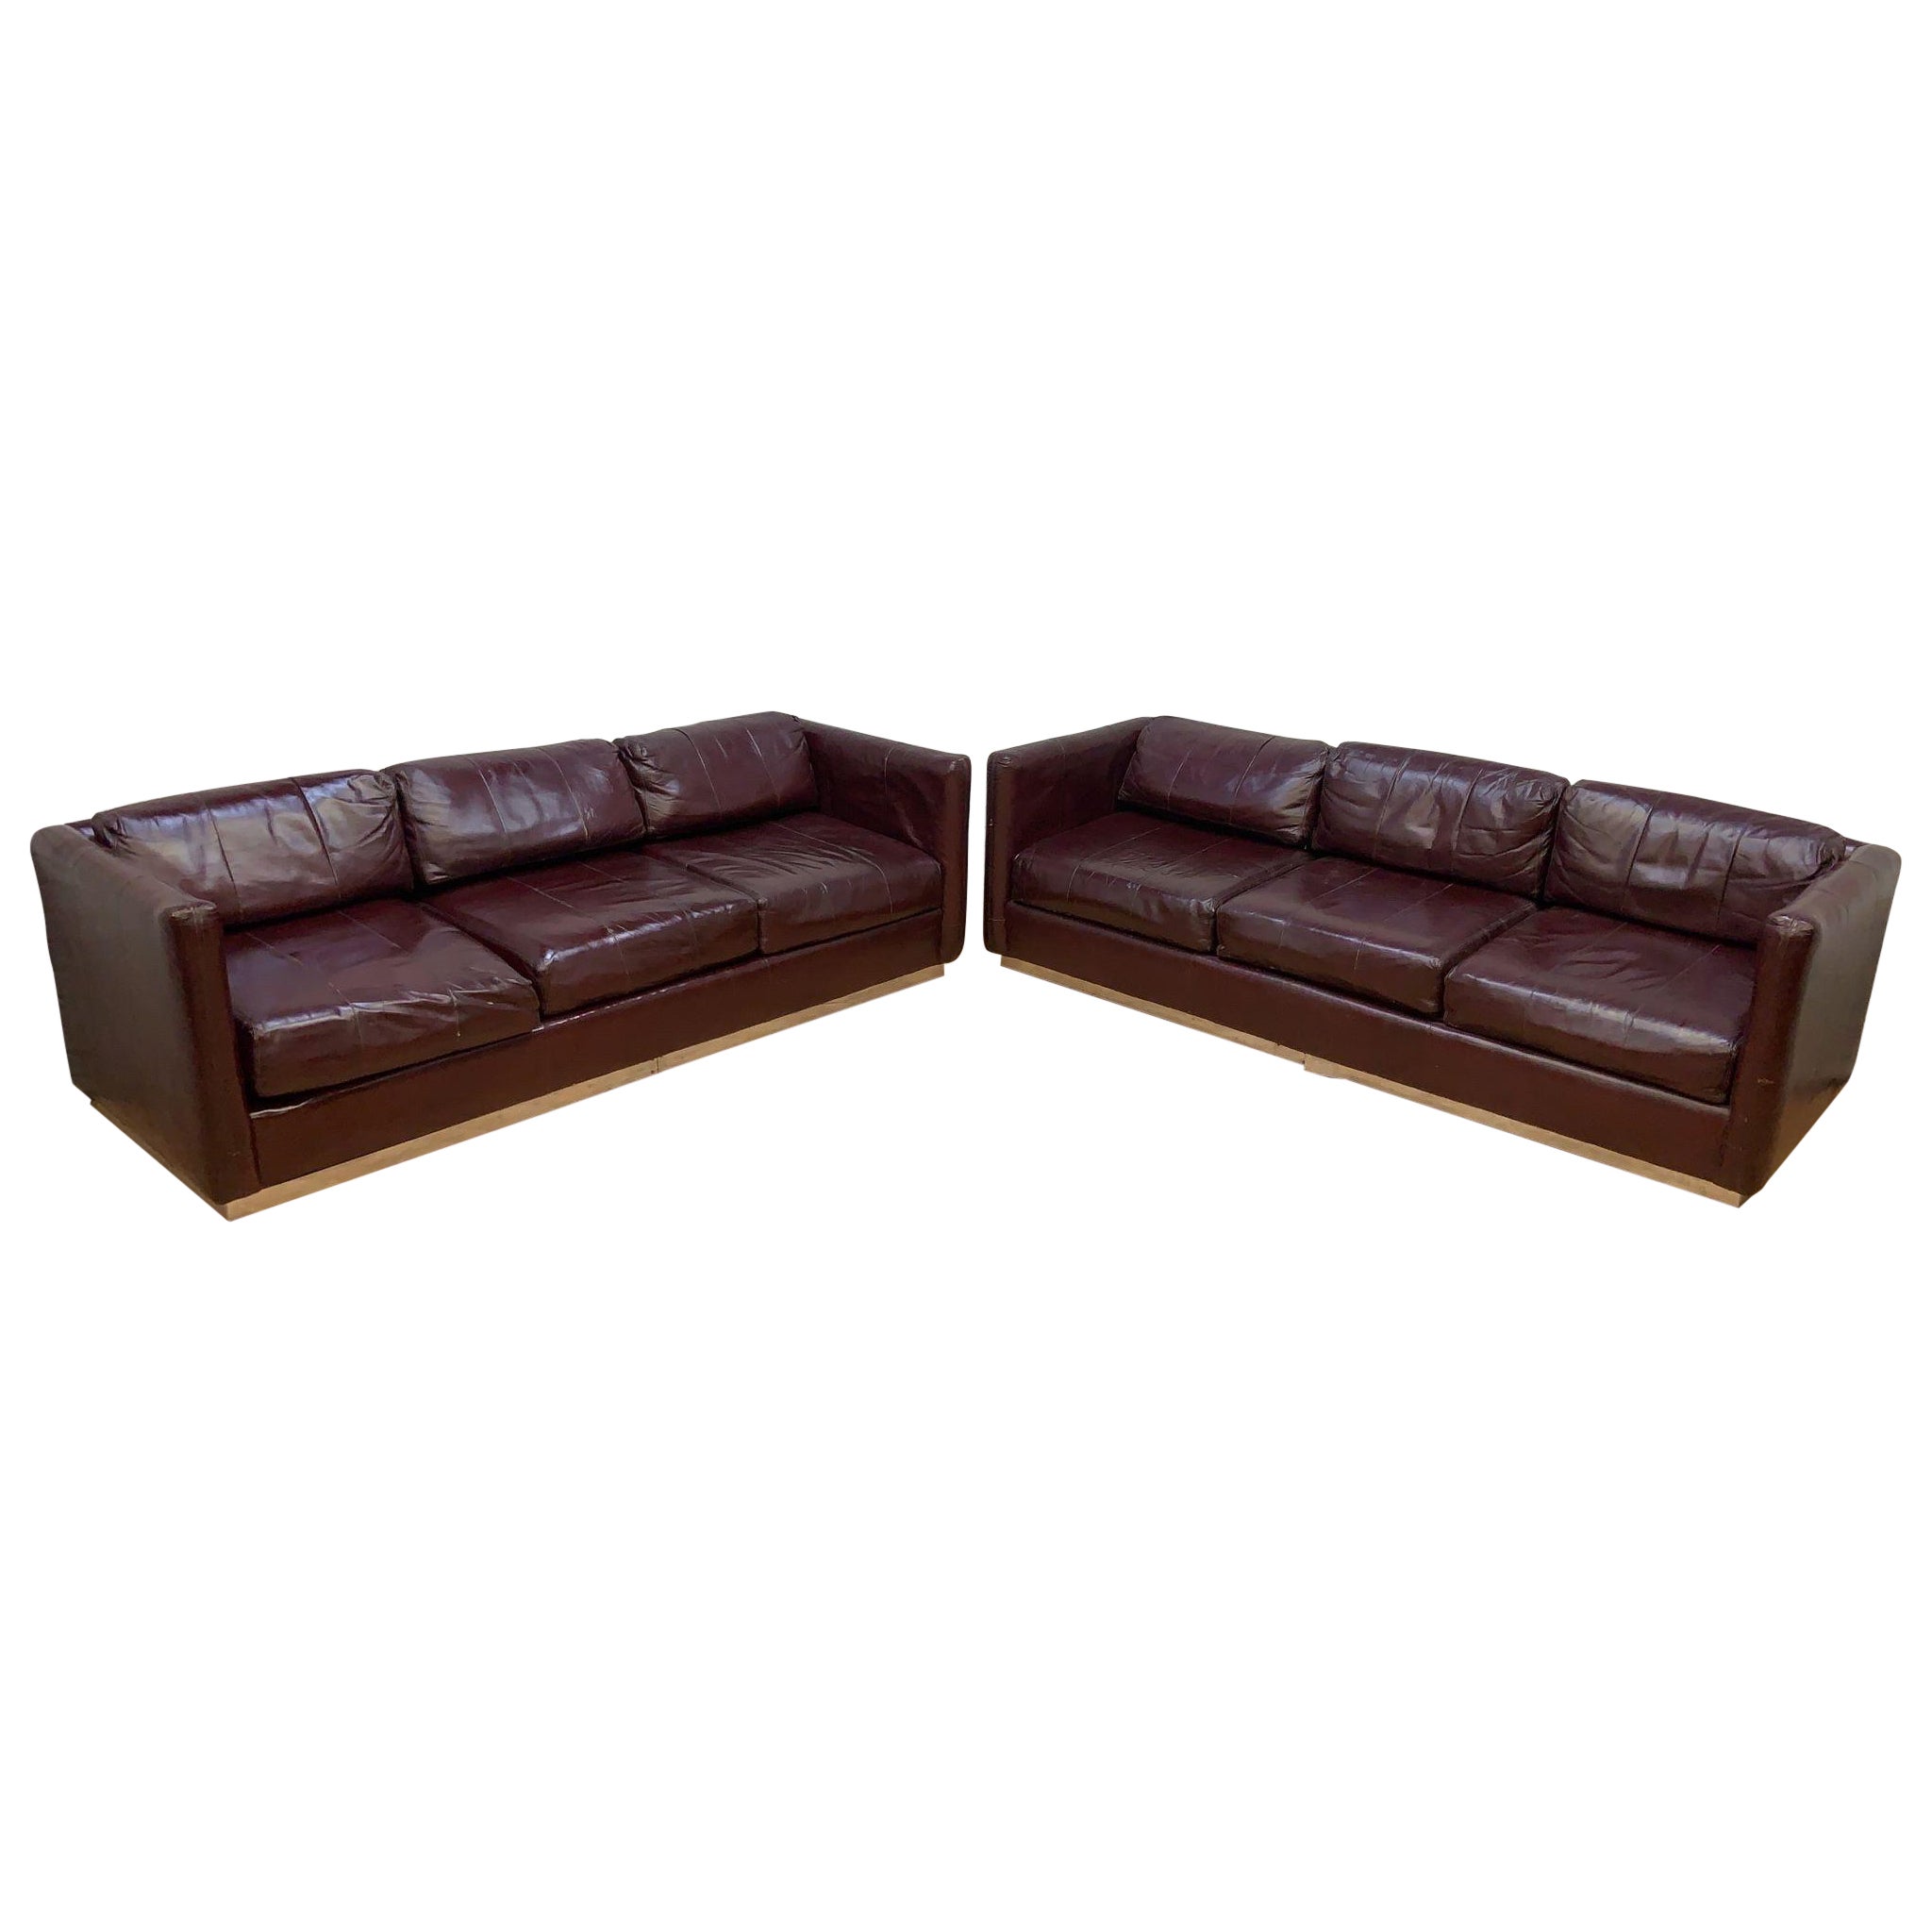 Mid Century Modern Ward Bennett Style Parlor Sofas on Chrome Bases - Set of 2 For Sale